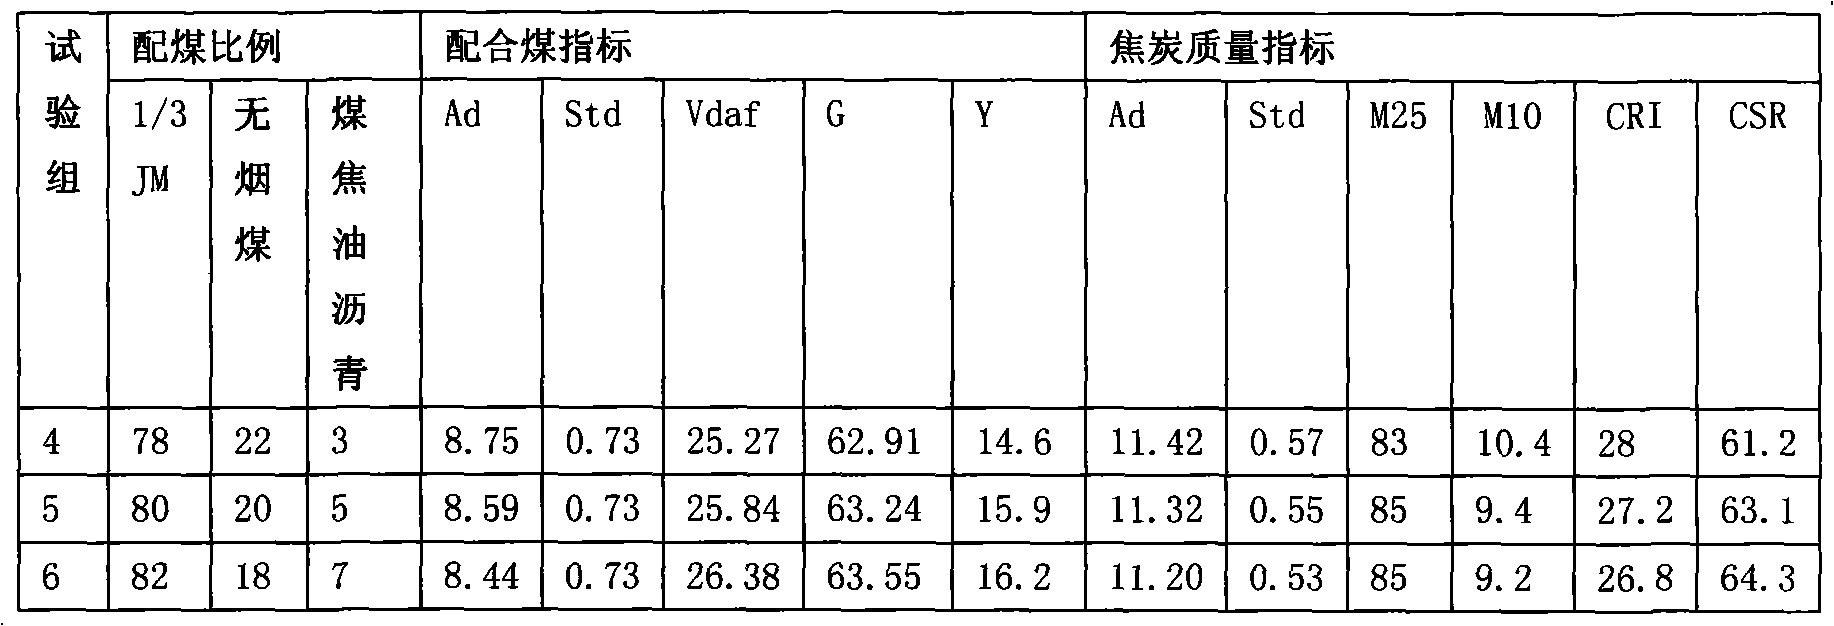 Process for producing first-class metallurgical coke by coking coal with high sulphur and high ash